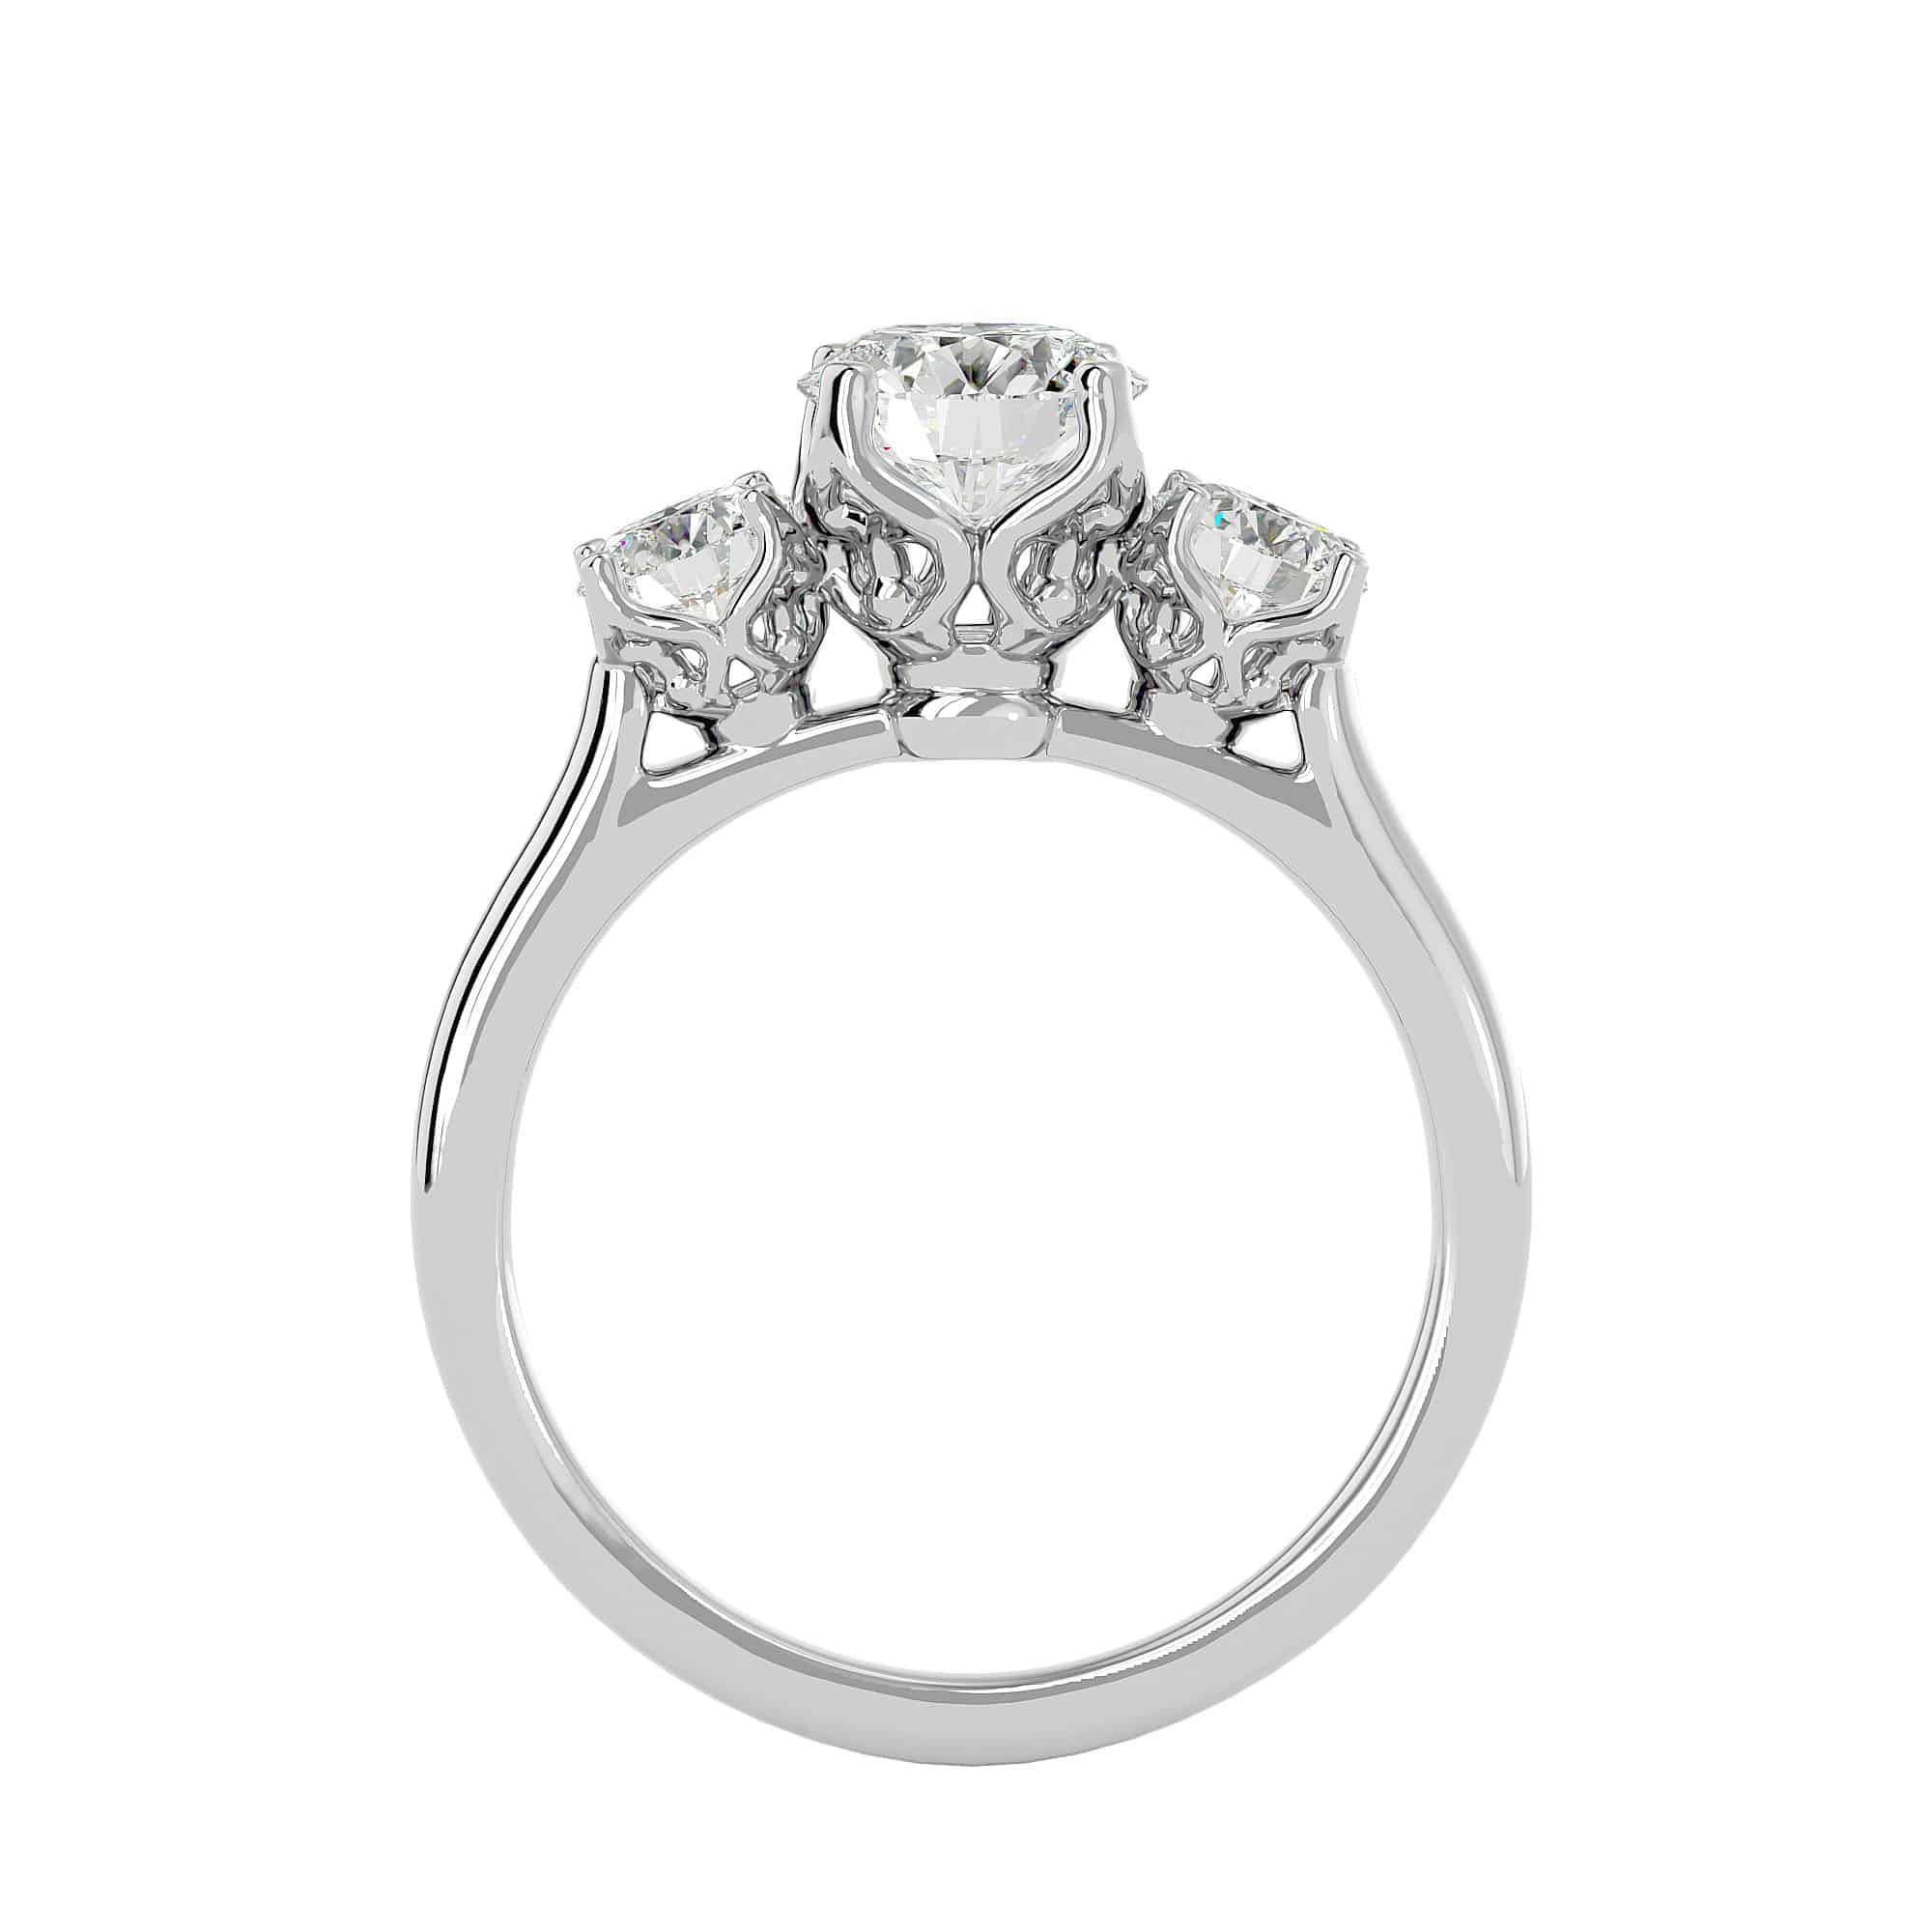 Josephine Classical Trilogy Engagement Ring Setting